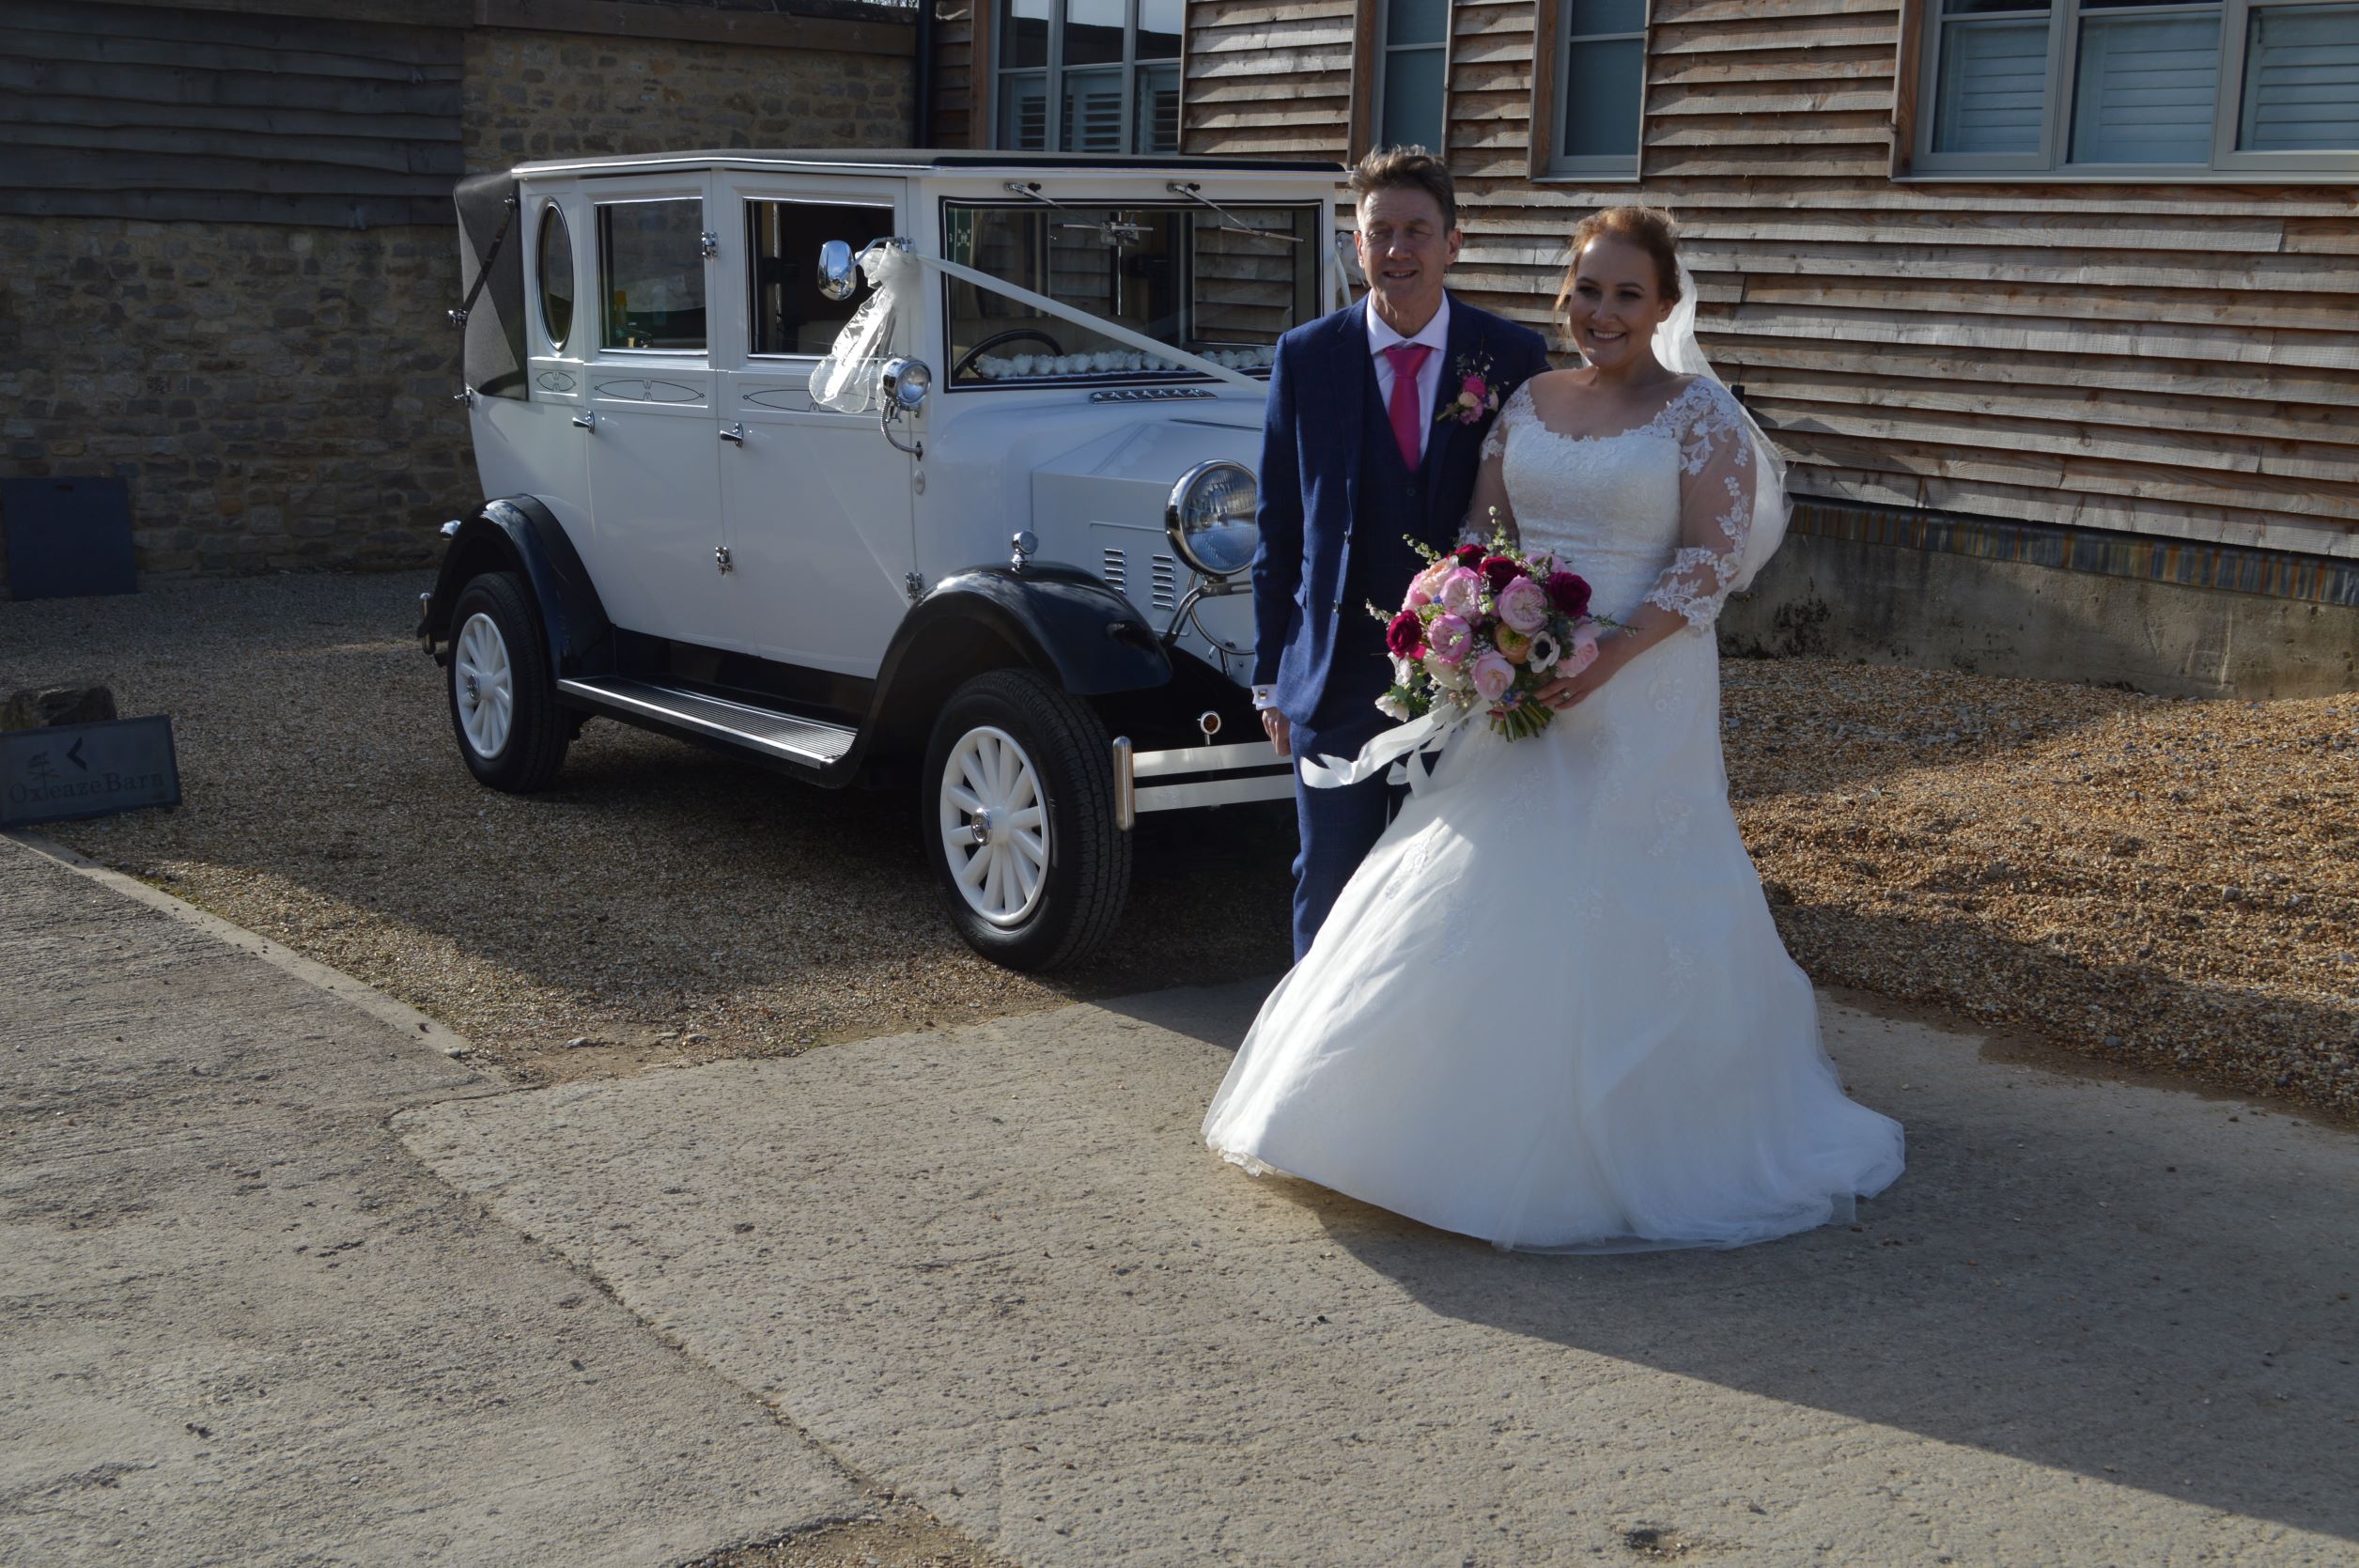 Oxleaze Barn wedding for Jennifer and Michael 12March22